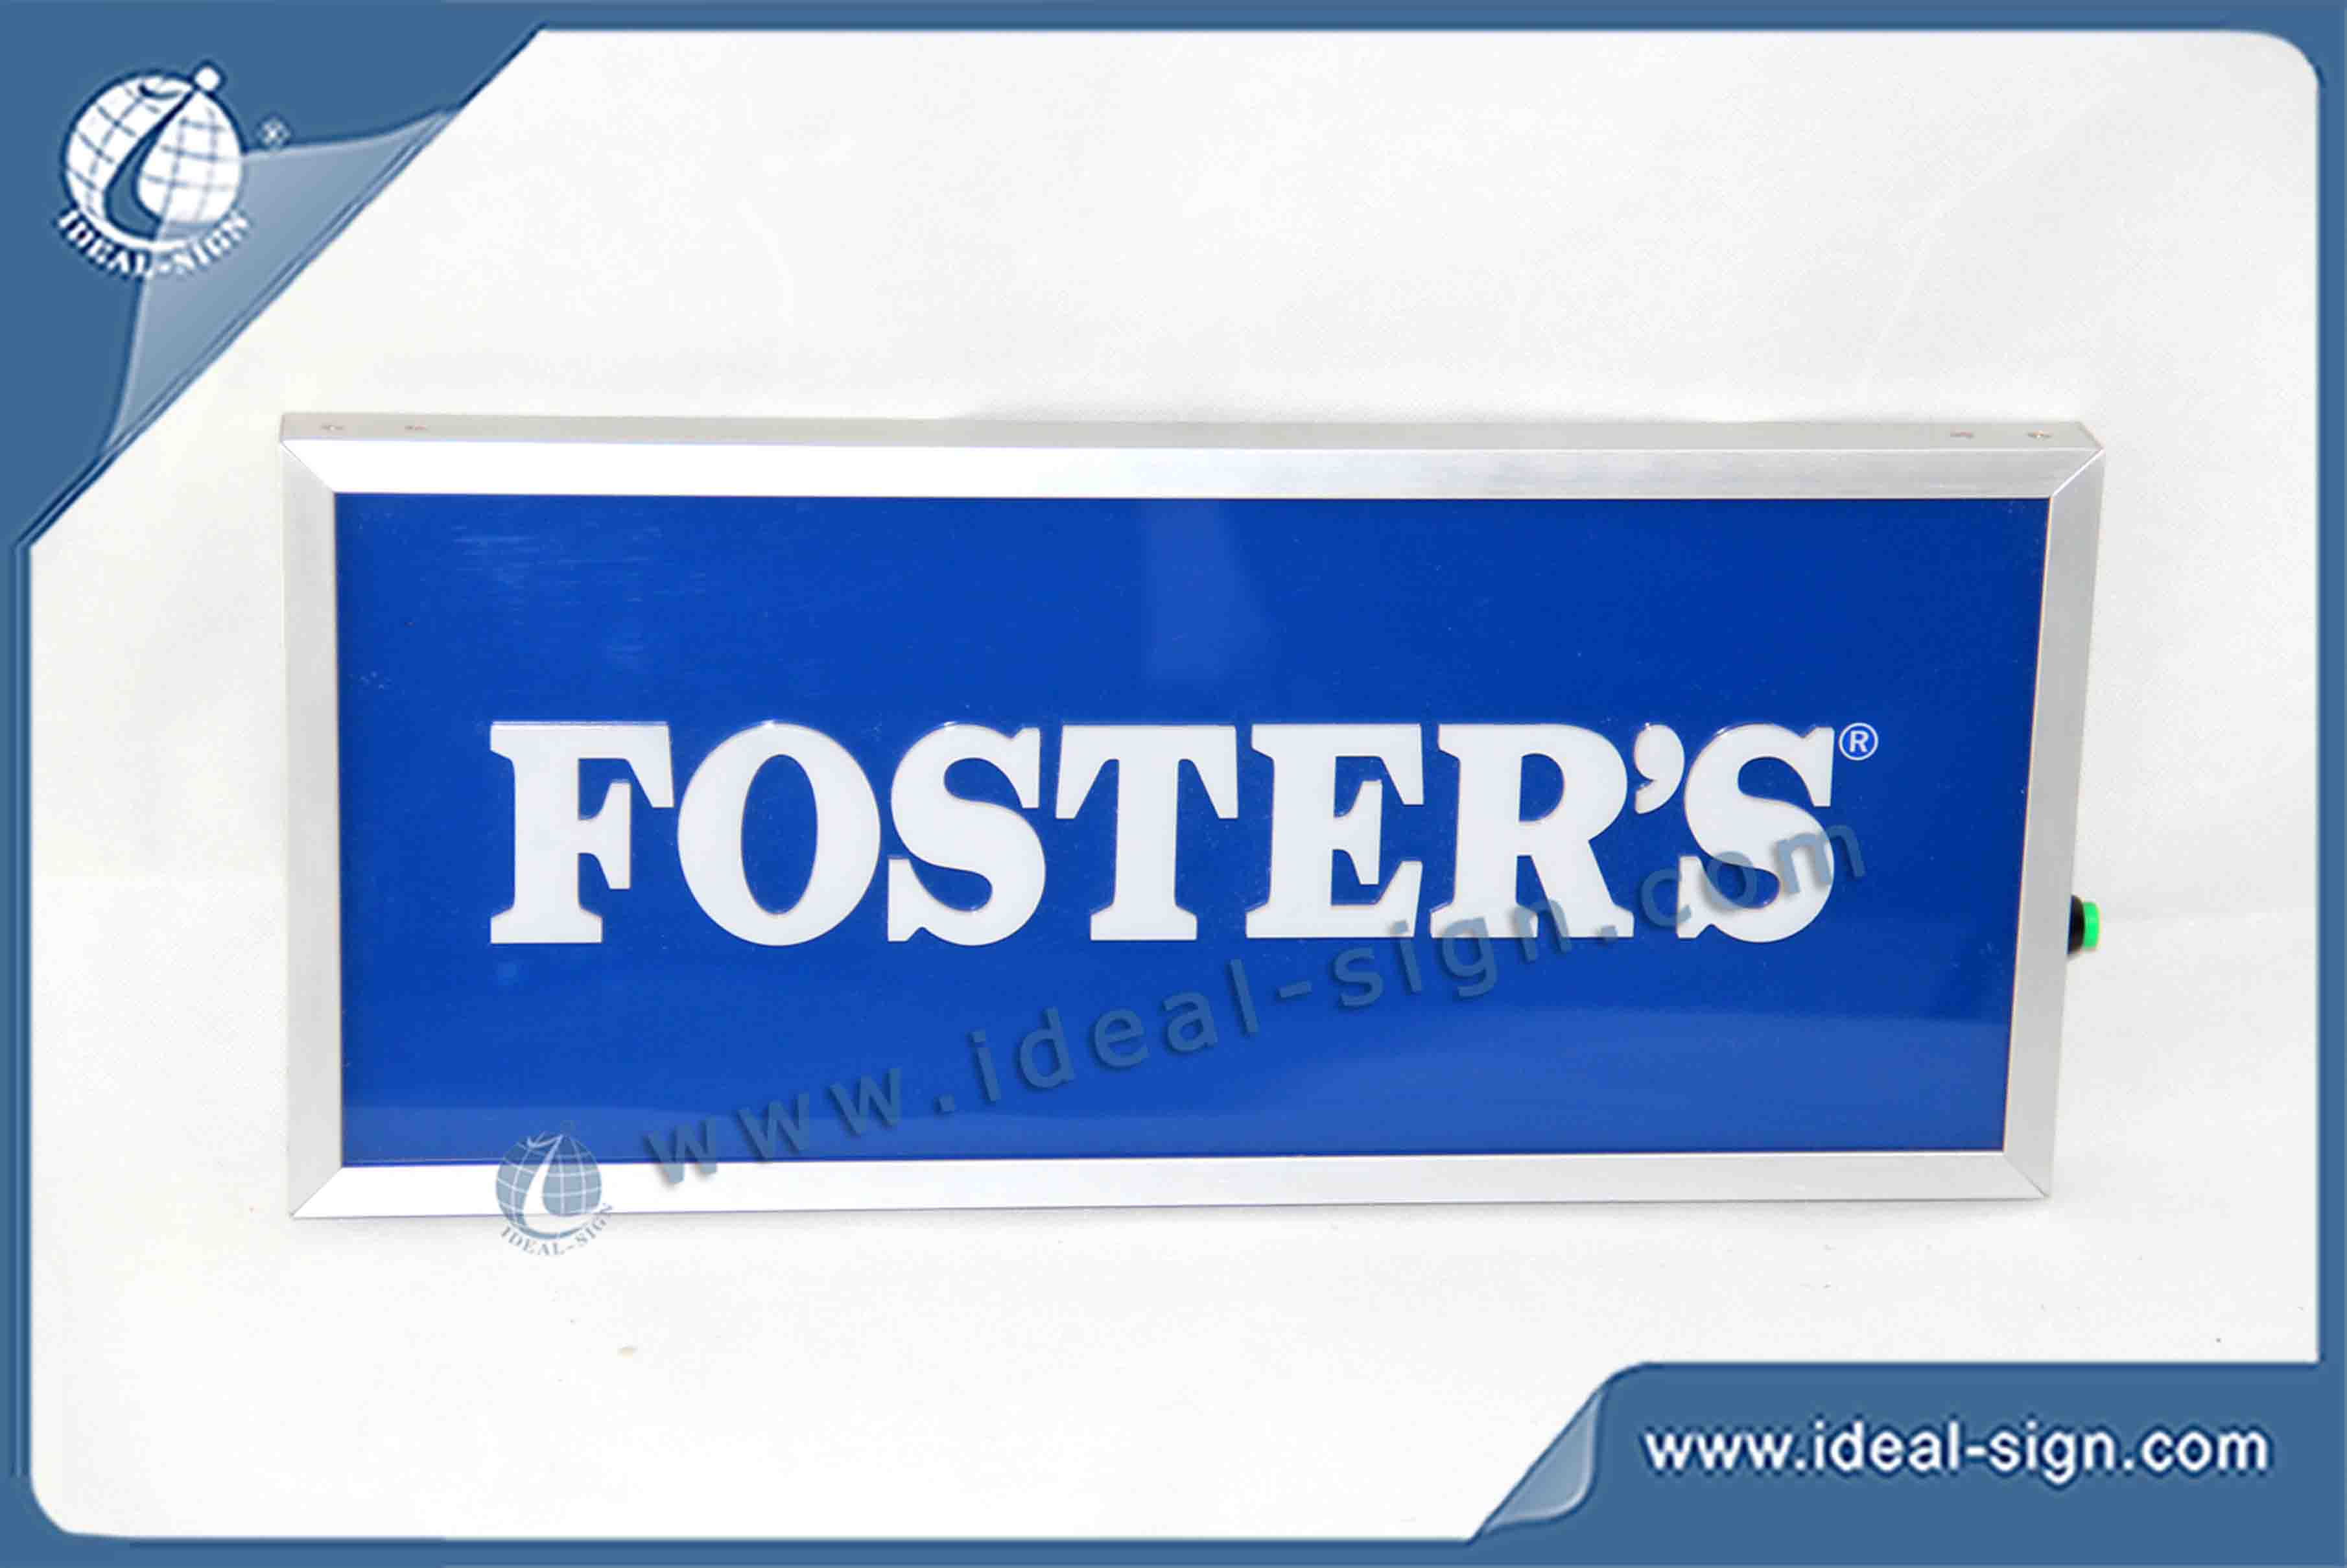 Personalized illuminated acrylic indoor signs lighted business signs for wholesale